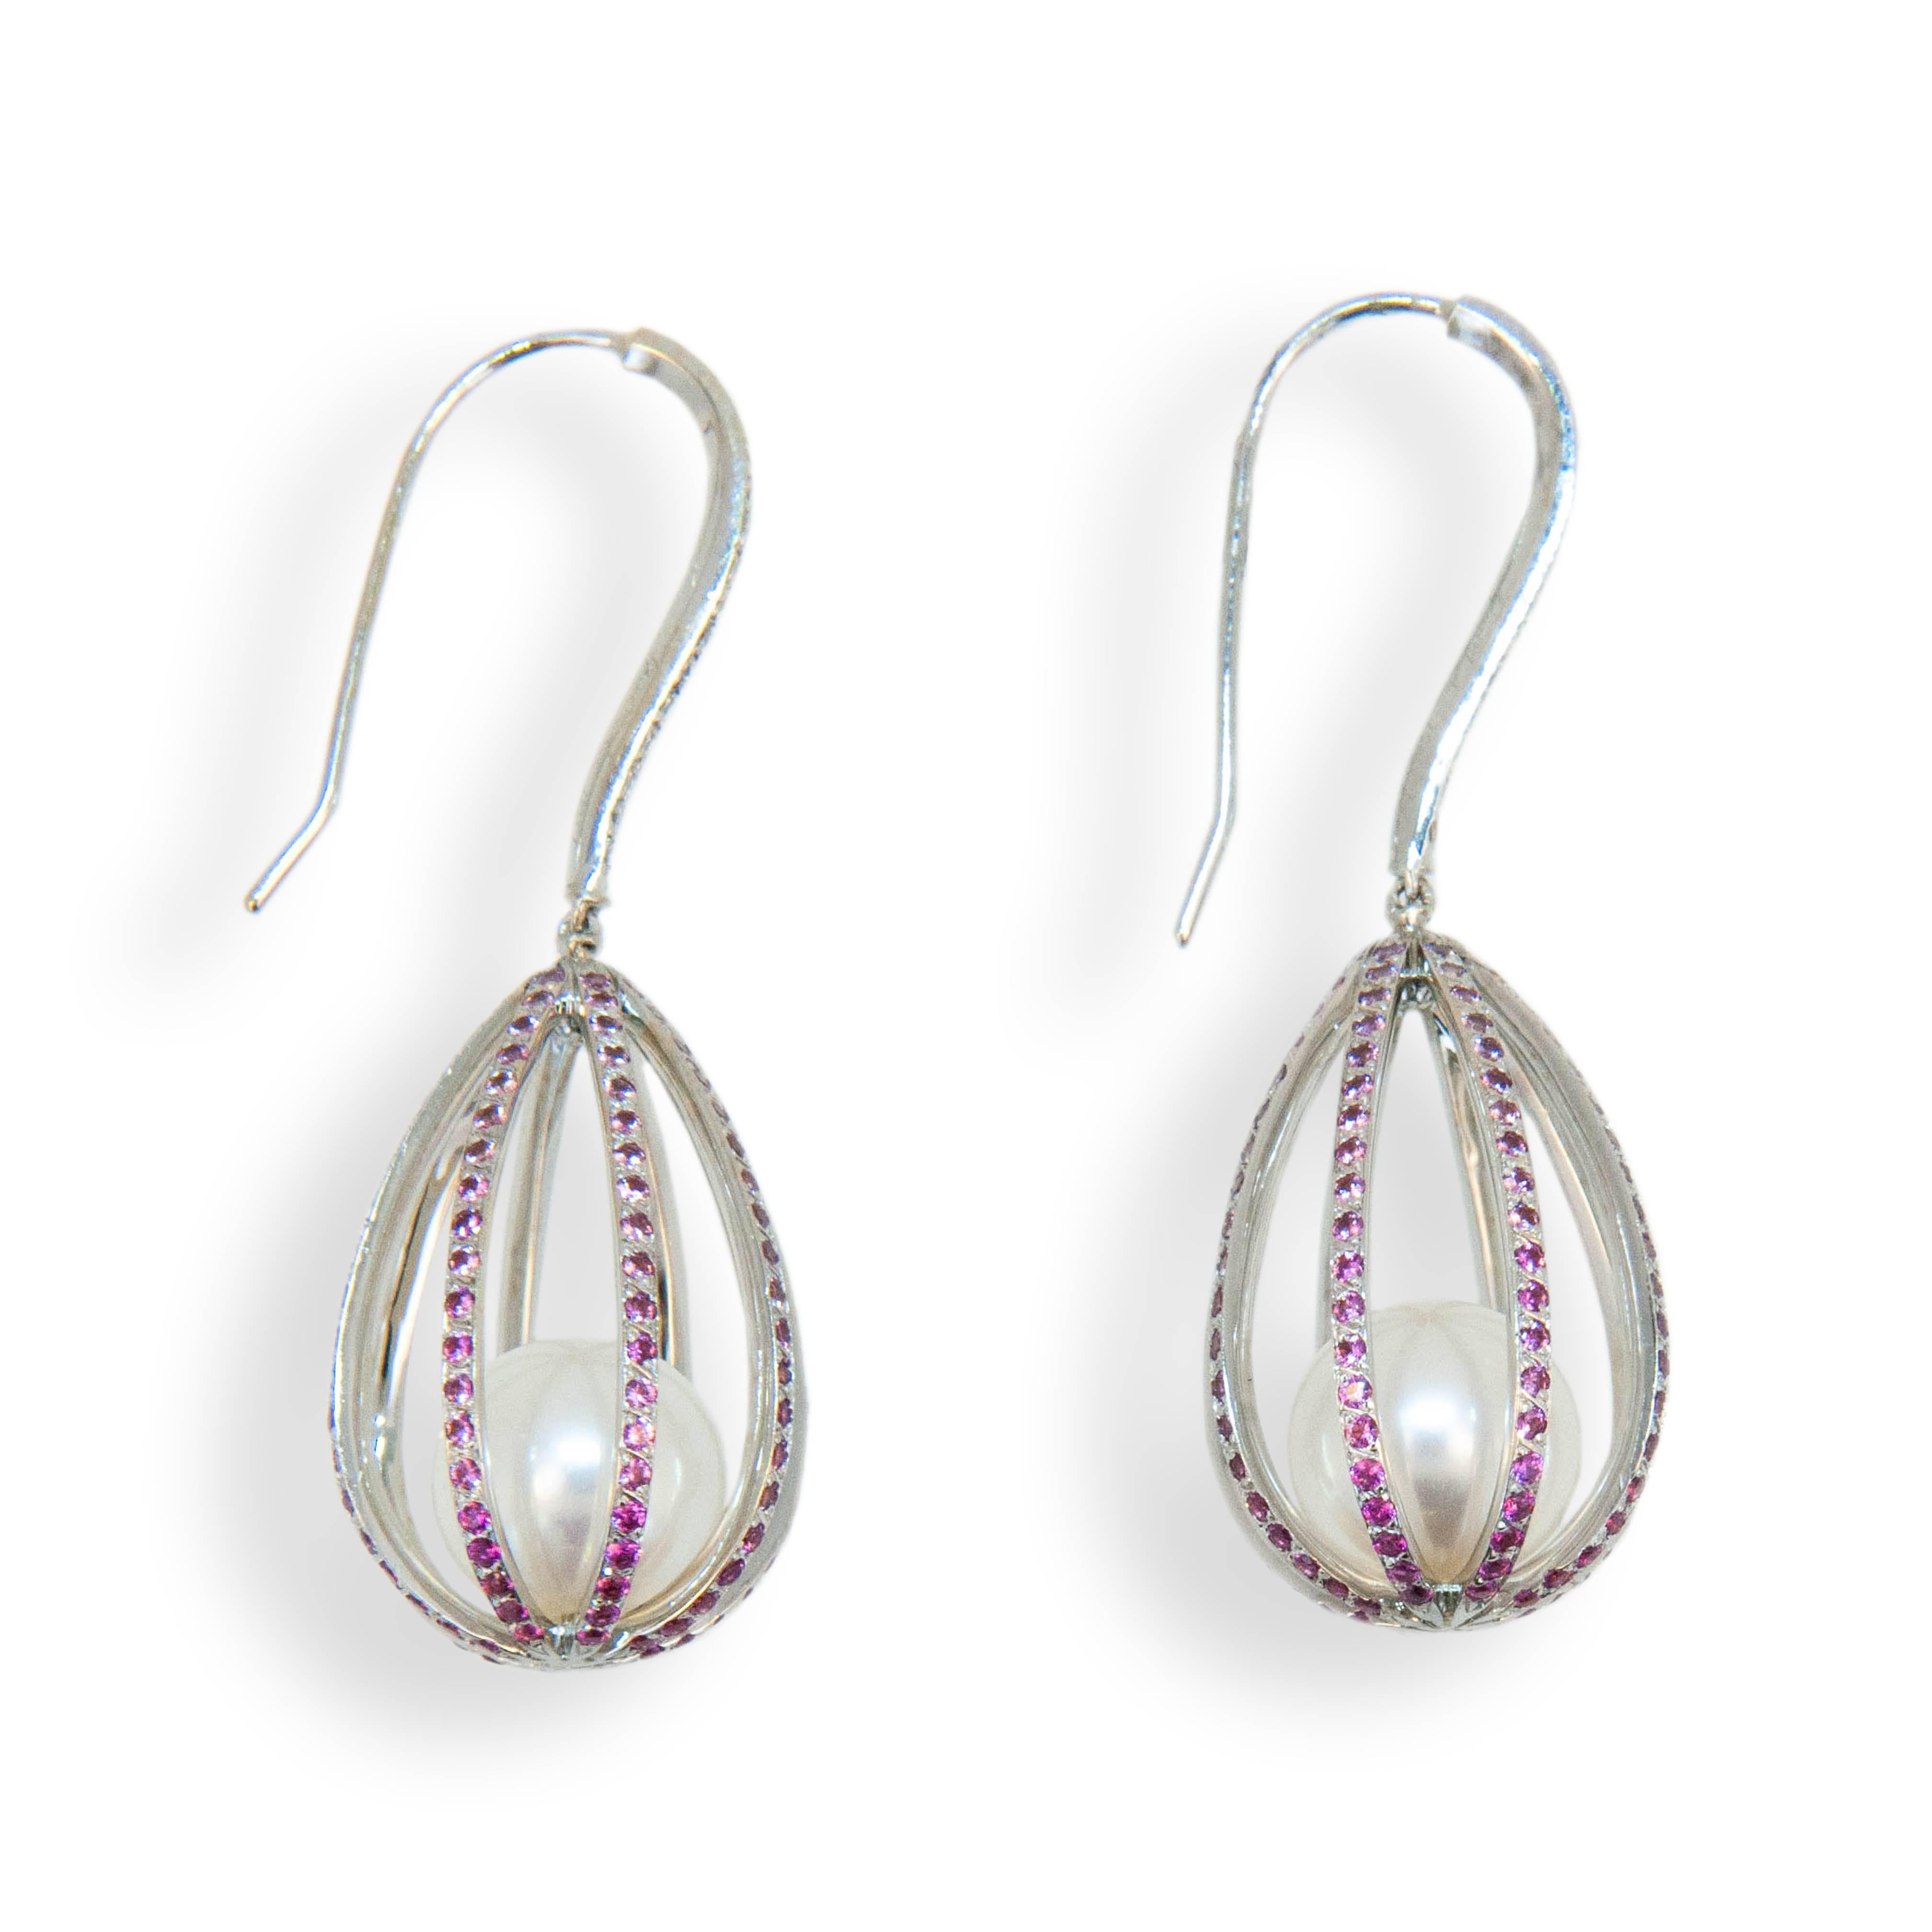 18 karat white gold earrings small cage style earrings with 9 mm cultured Akoya pearls. Cages are micro set with 320 1 mm Pink Sapphires graduating in color from light to dark pink having a total weight of 1.72 carats total weight. Wires at top are